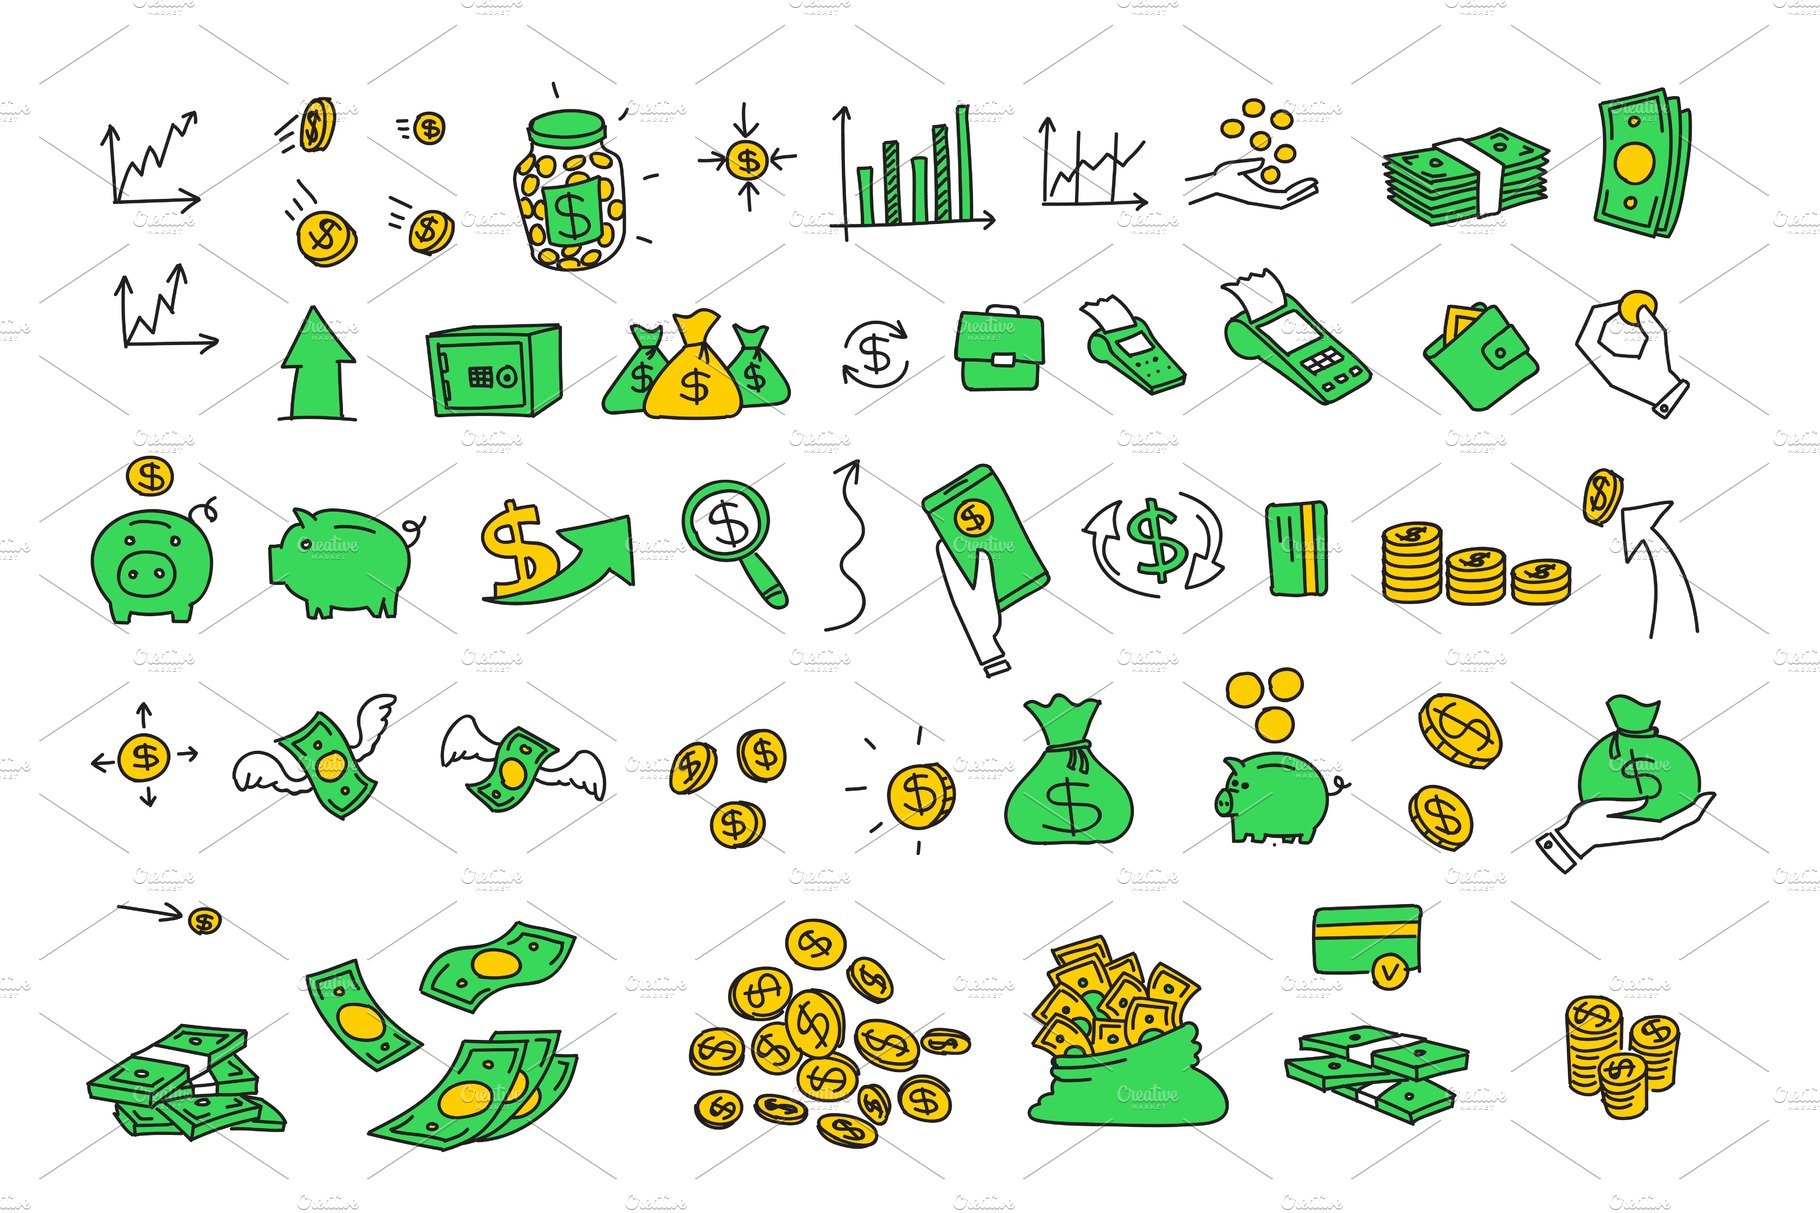 A bunch of money icons on a white background.